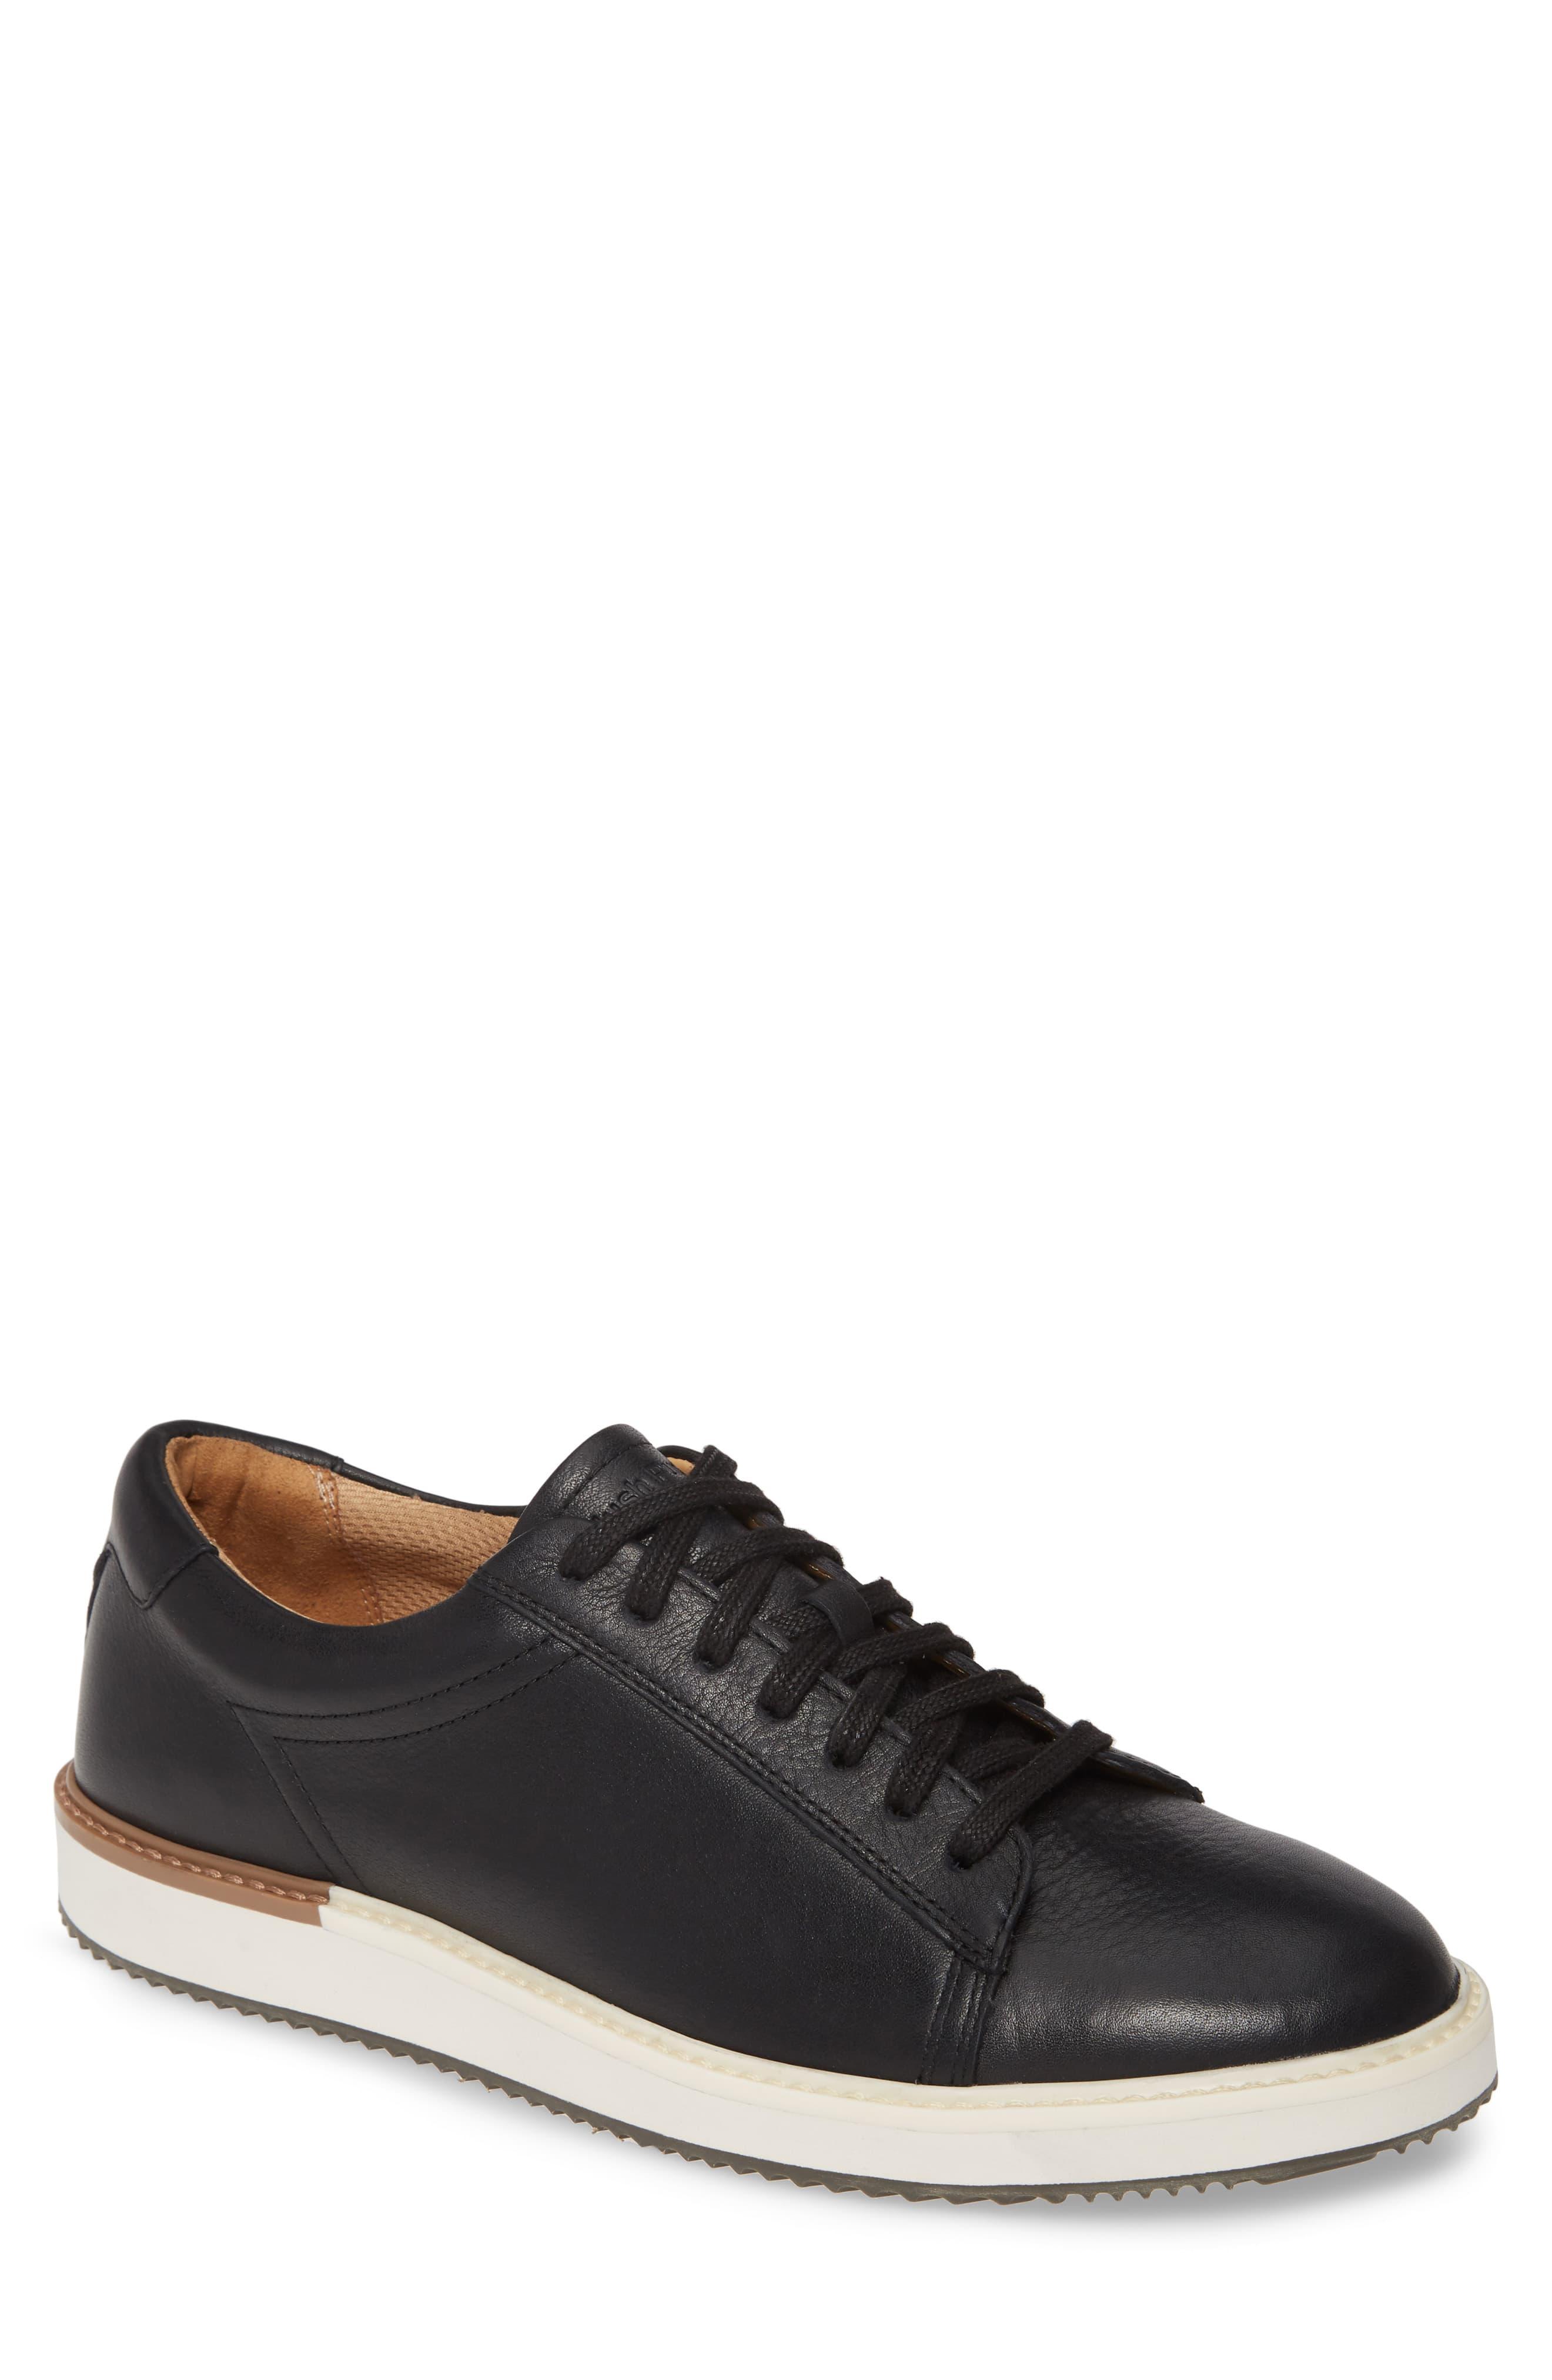 Hush Puppies Rubber Heath Sneaker in Black Leather (Black) for Men - Lyst